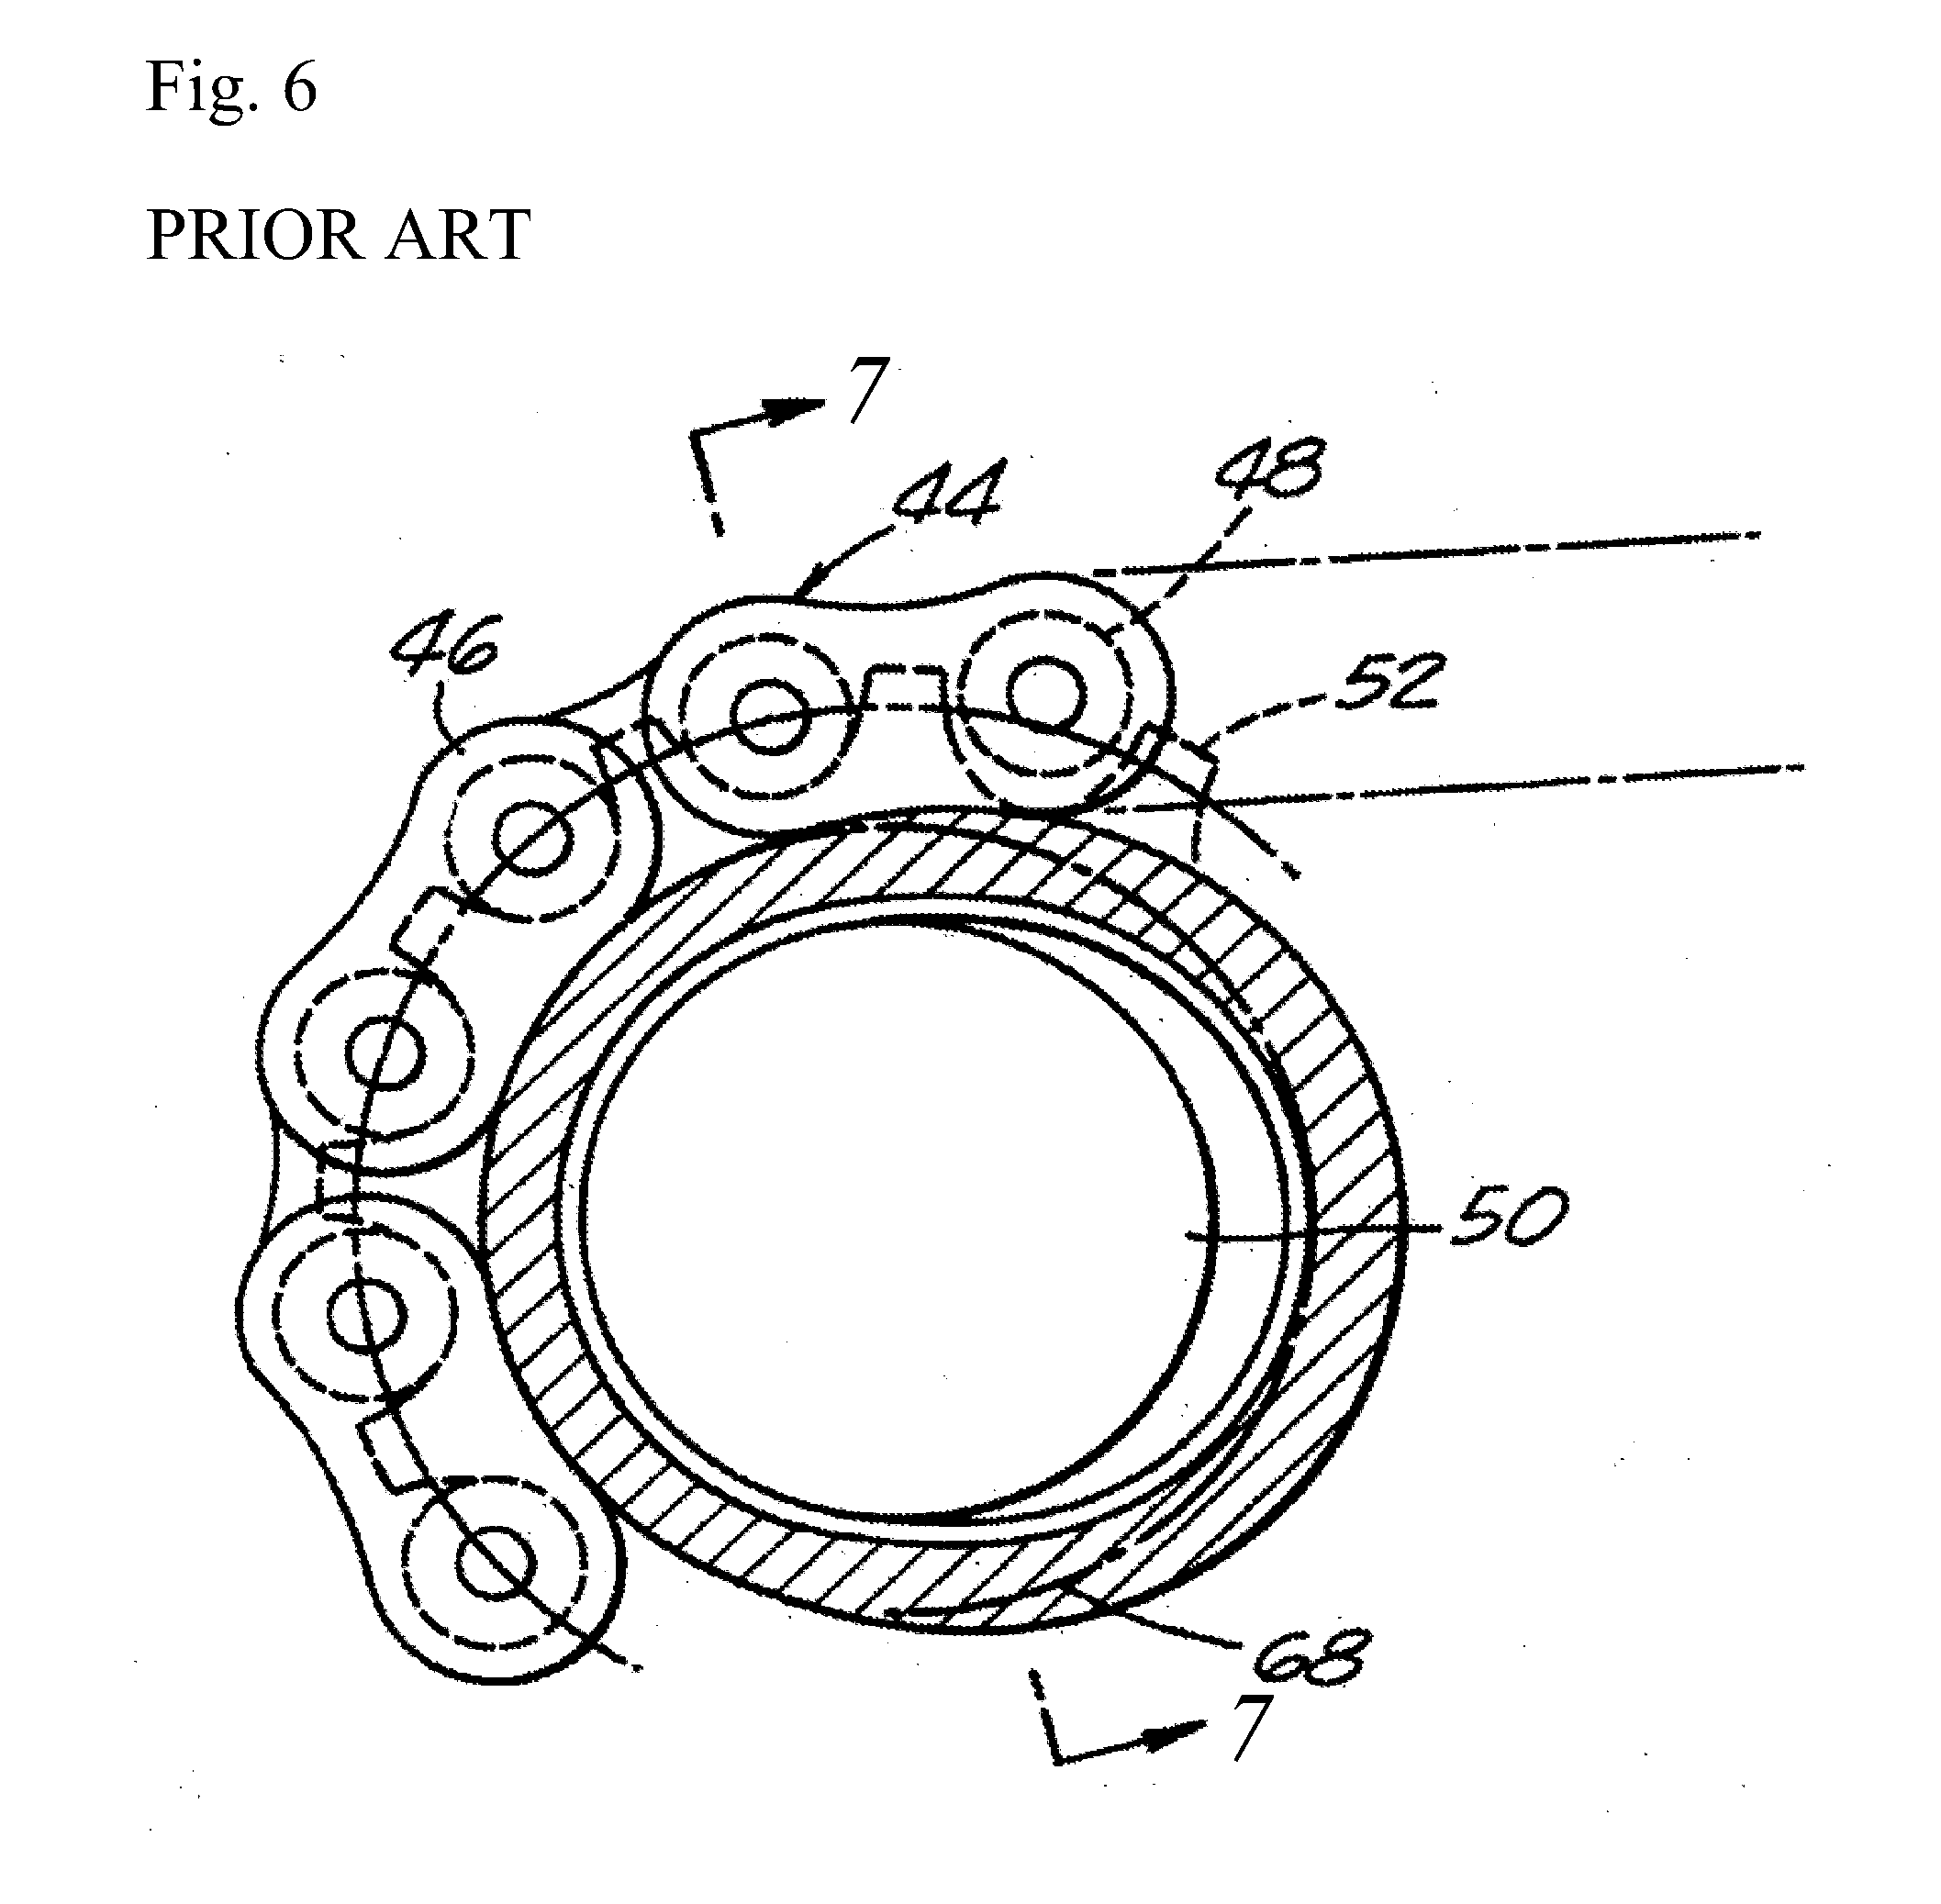 Chain noise reduction device